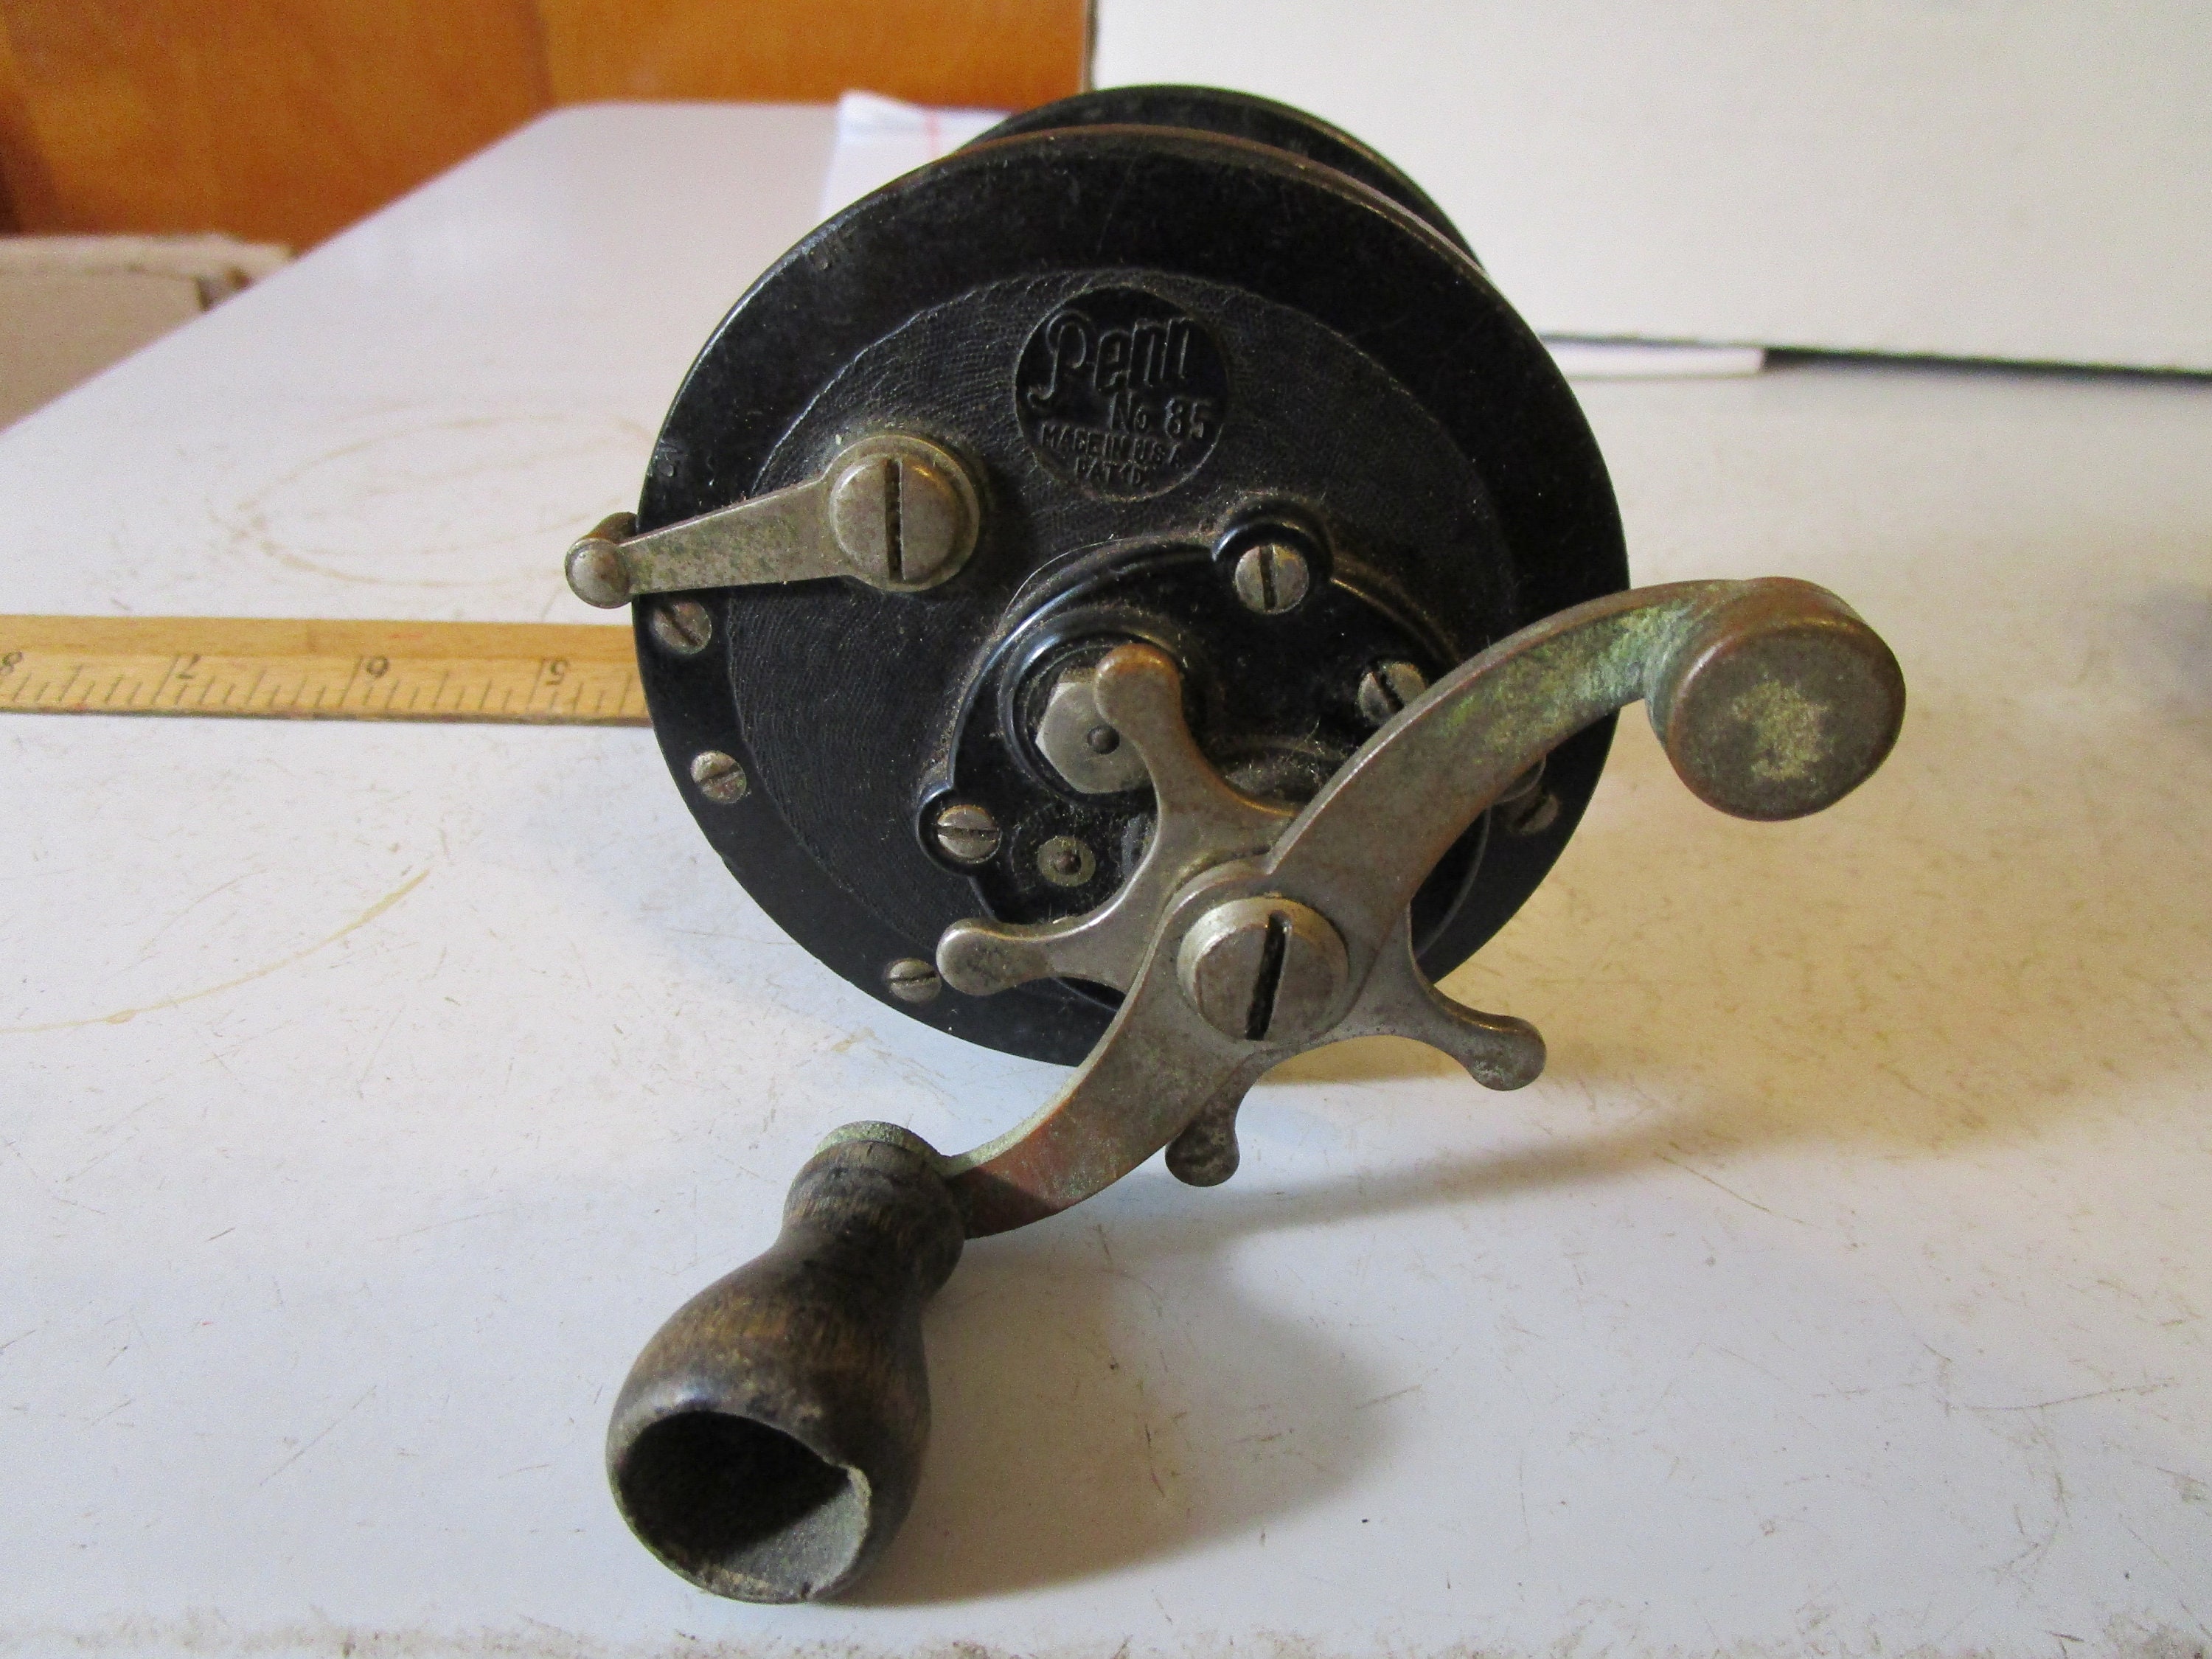 Vintage Penn No. 85, USA, Trolling/casting Reel With Wood Handle